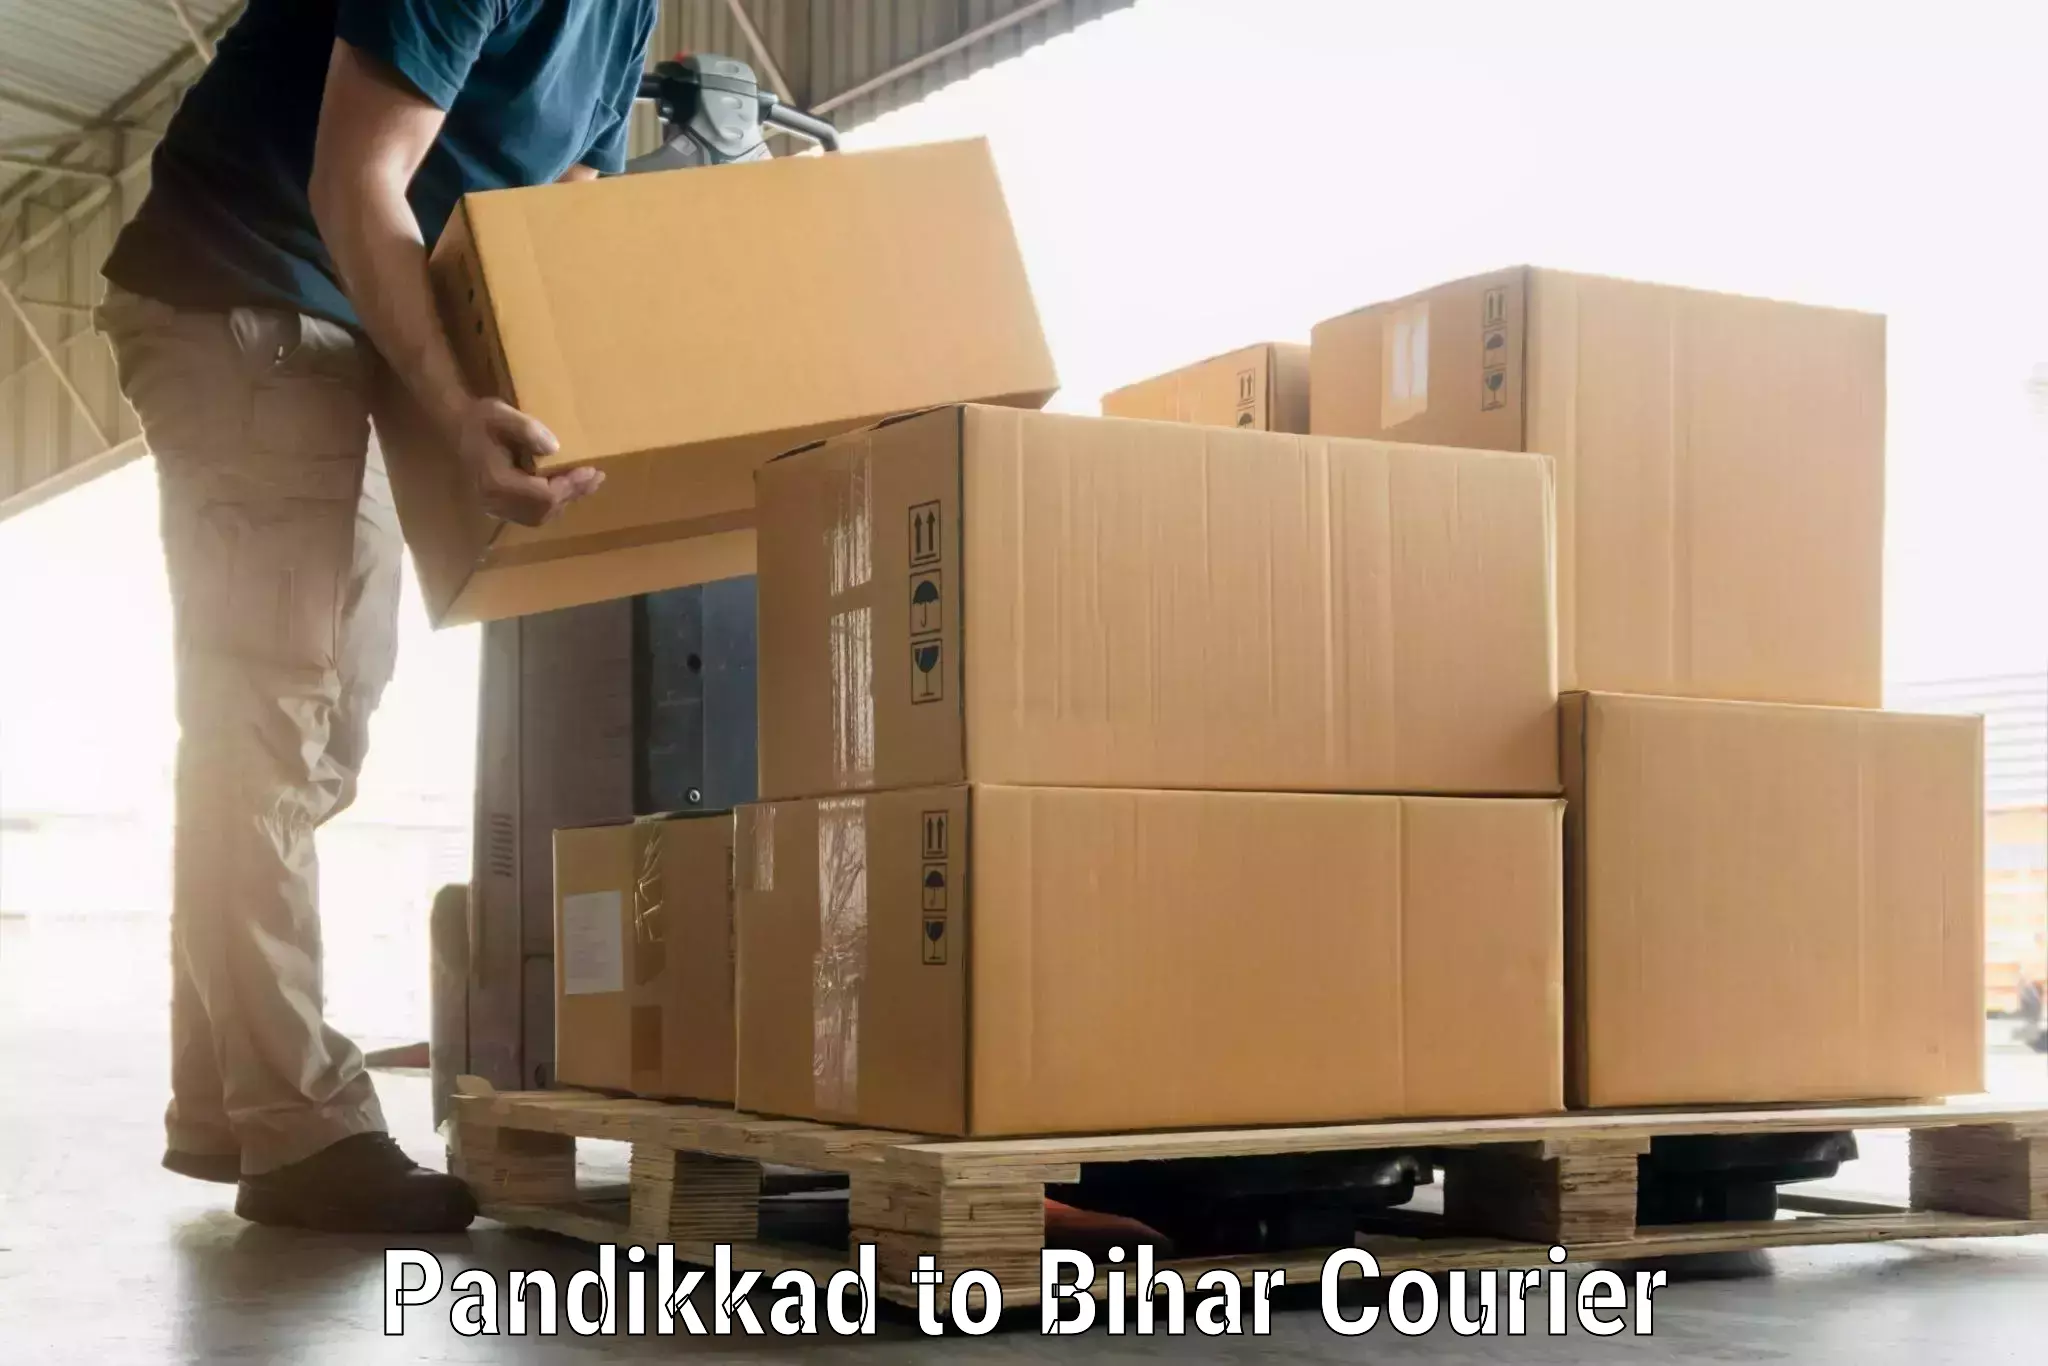 Luggage shipping specialists Pandikkad to Bhorey